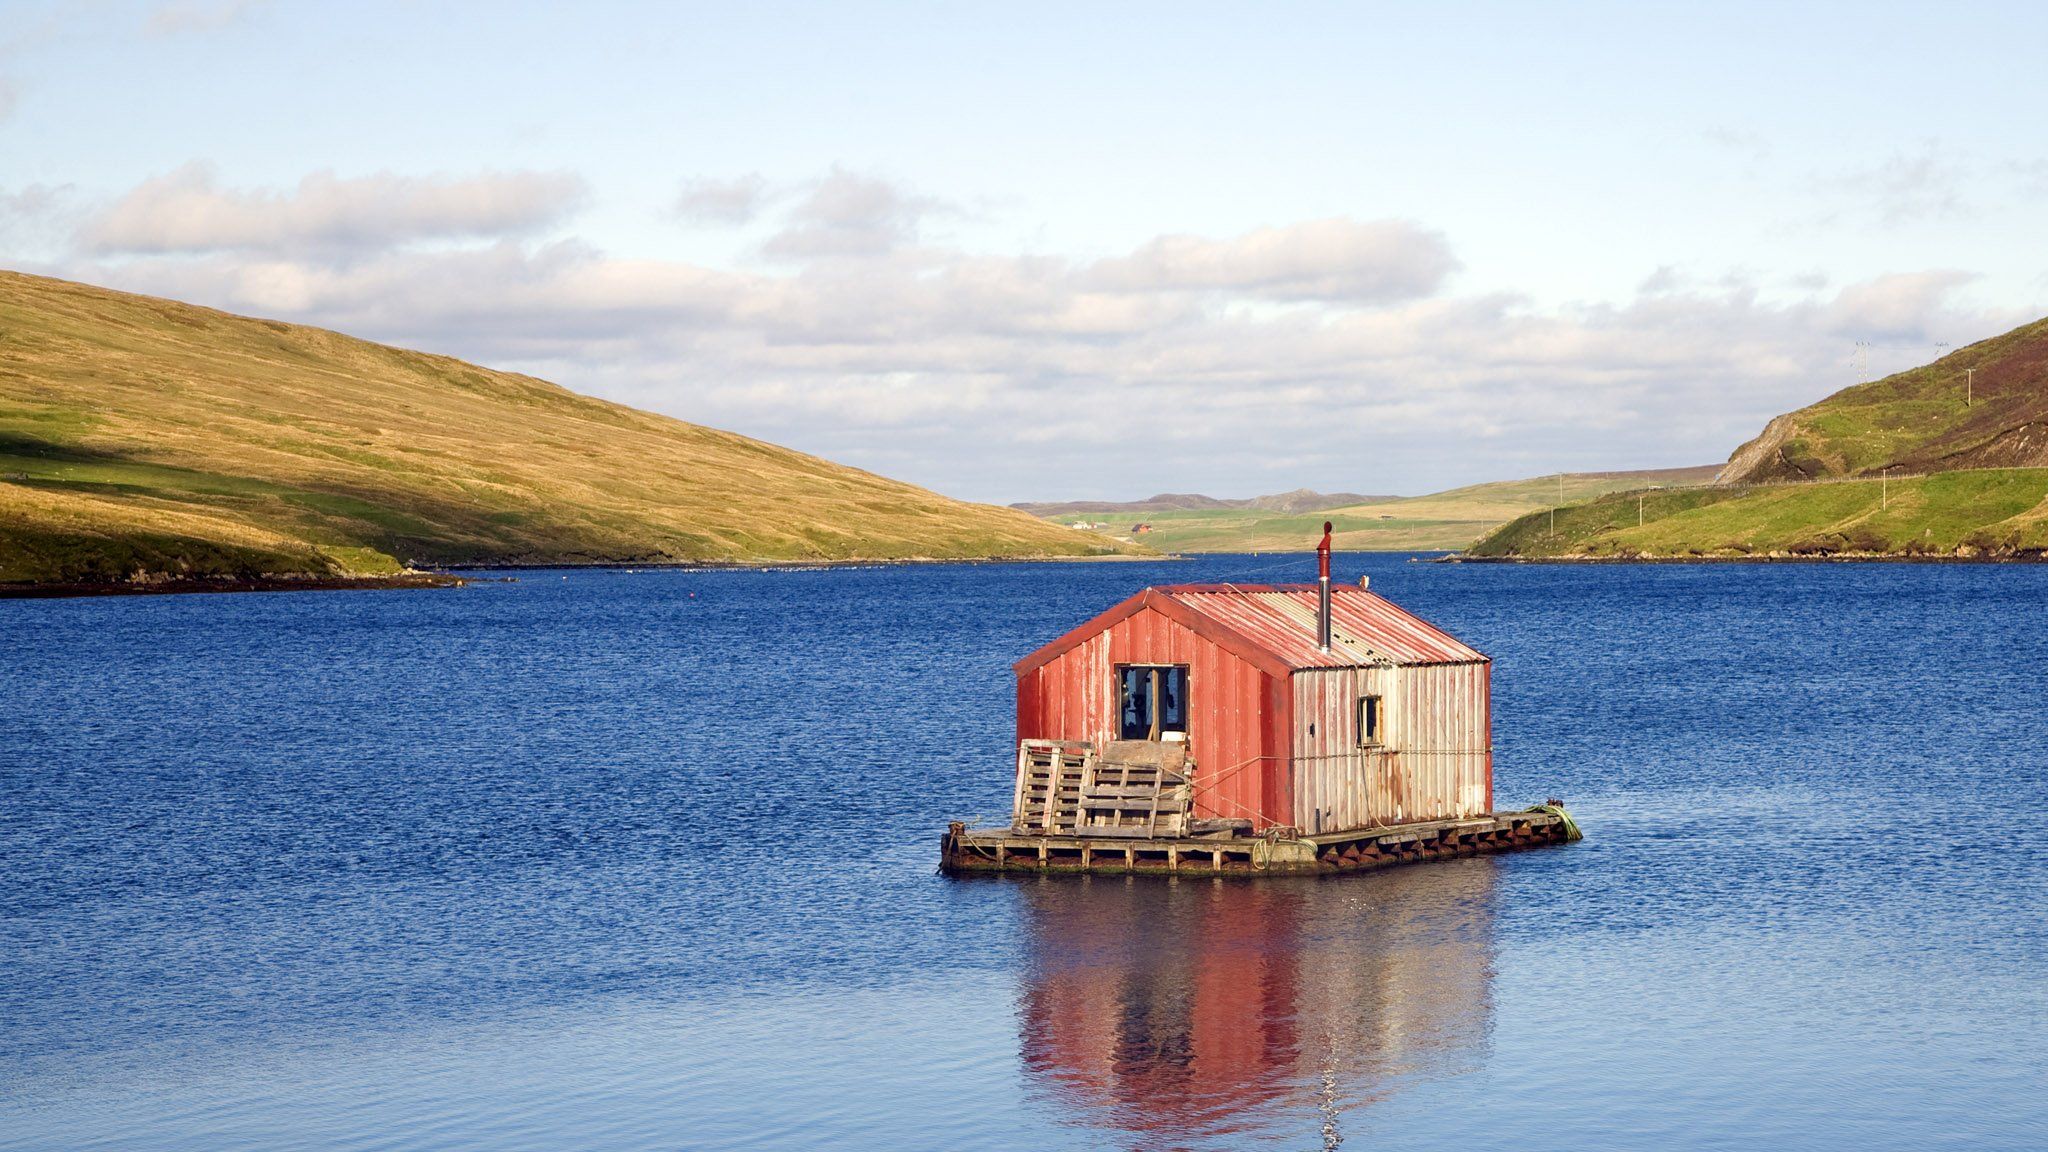 Fisherman's shed